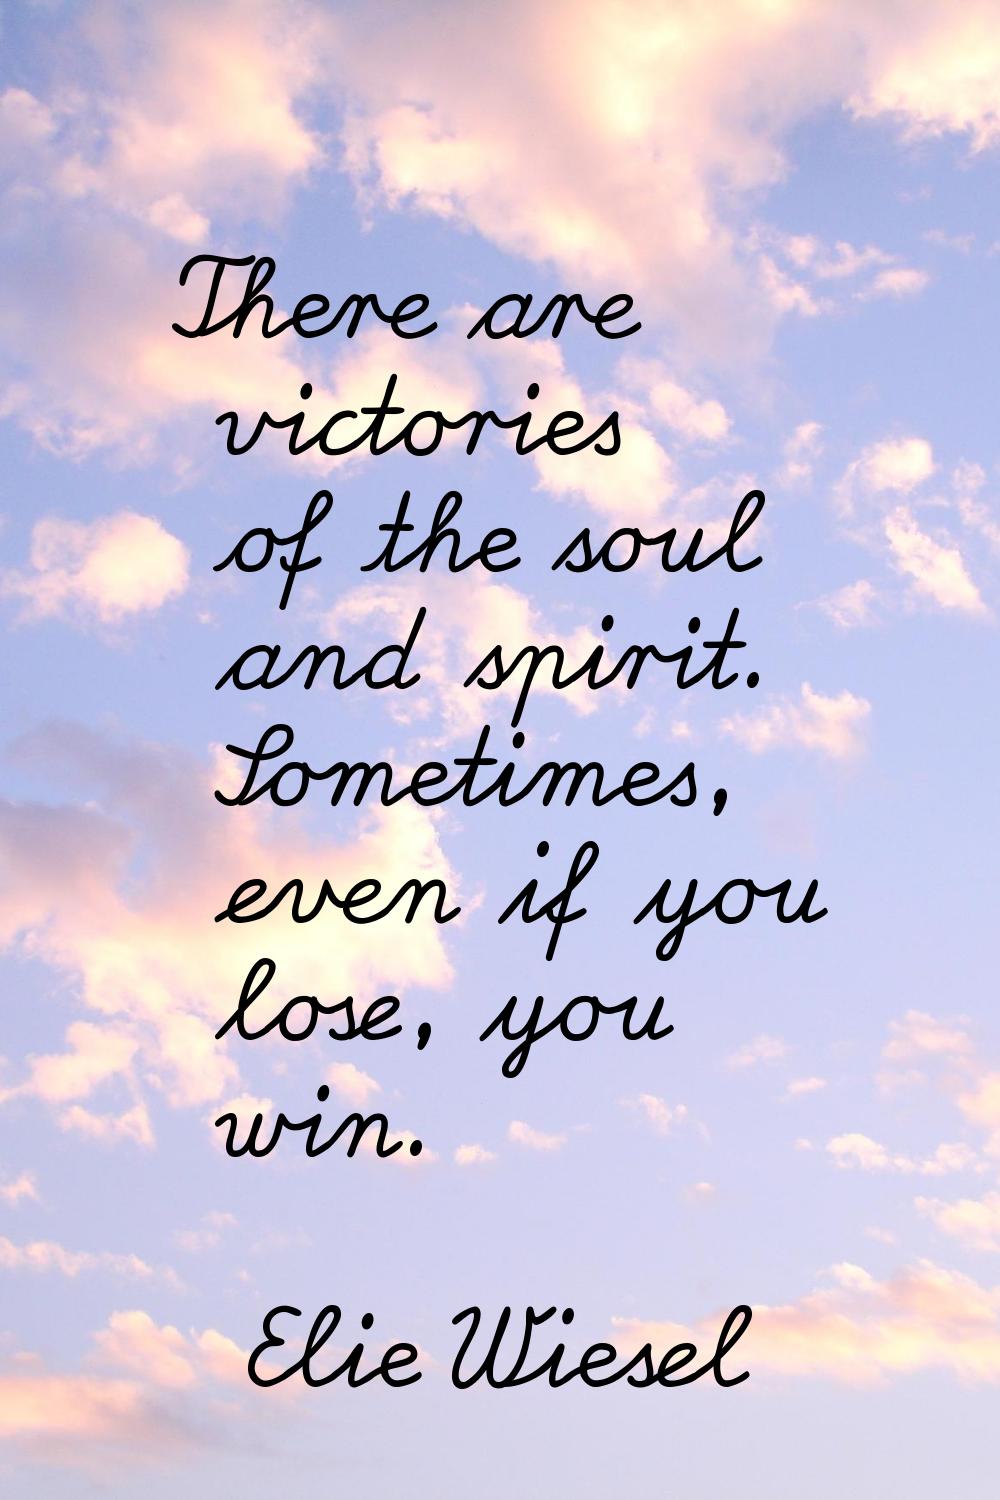 There are victories of the soul and spirit. Sometimes, even if you lose, you win.